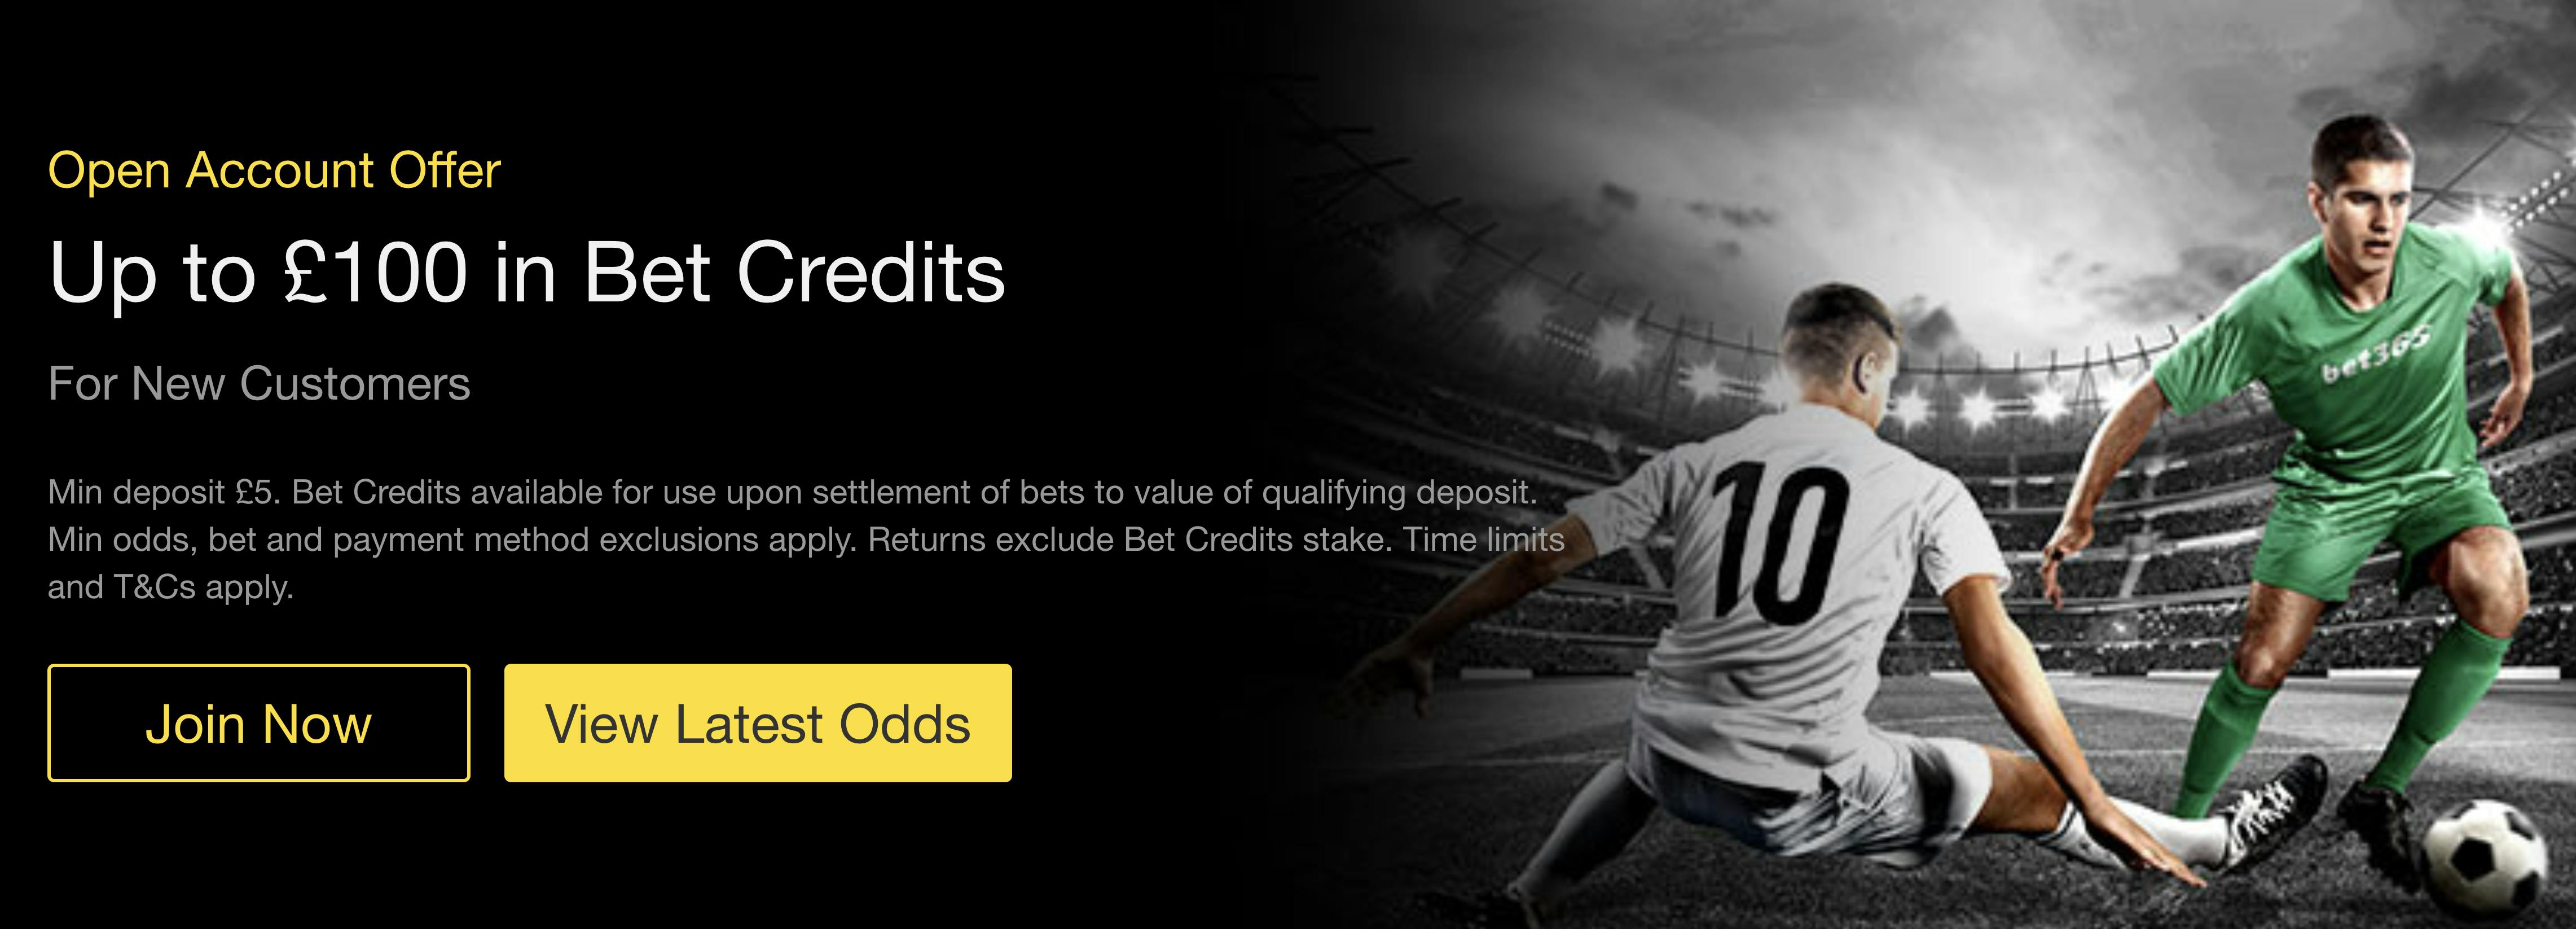 Best Betting Site Offers in the UK 2021 » Free Bets & Welcome Bonuses